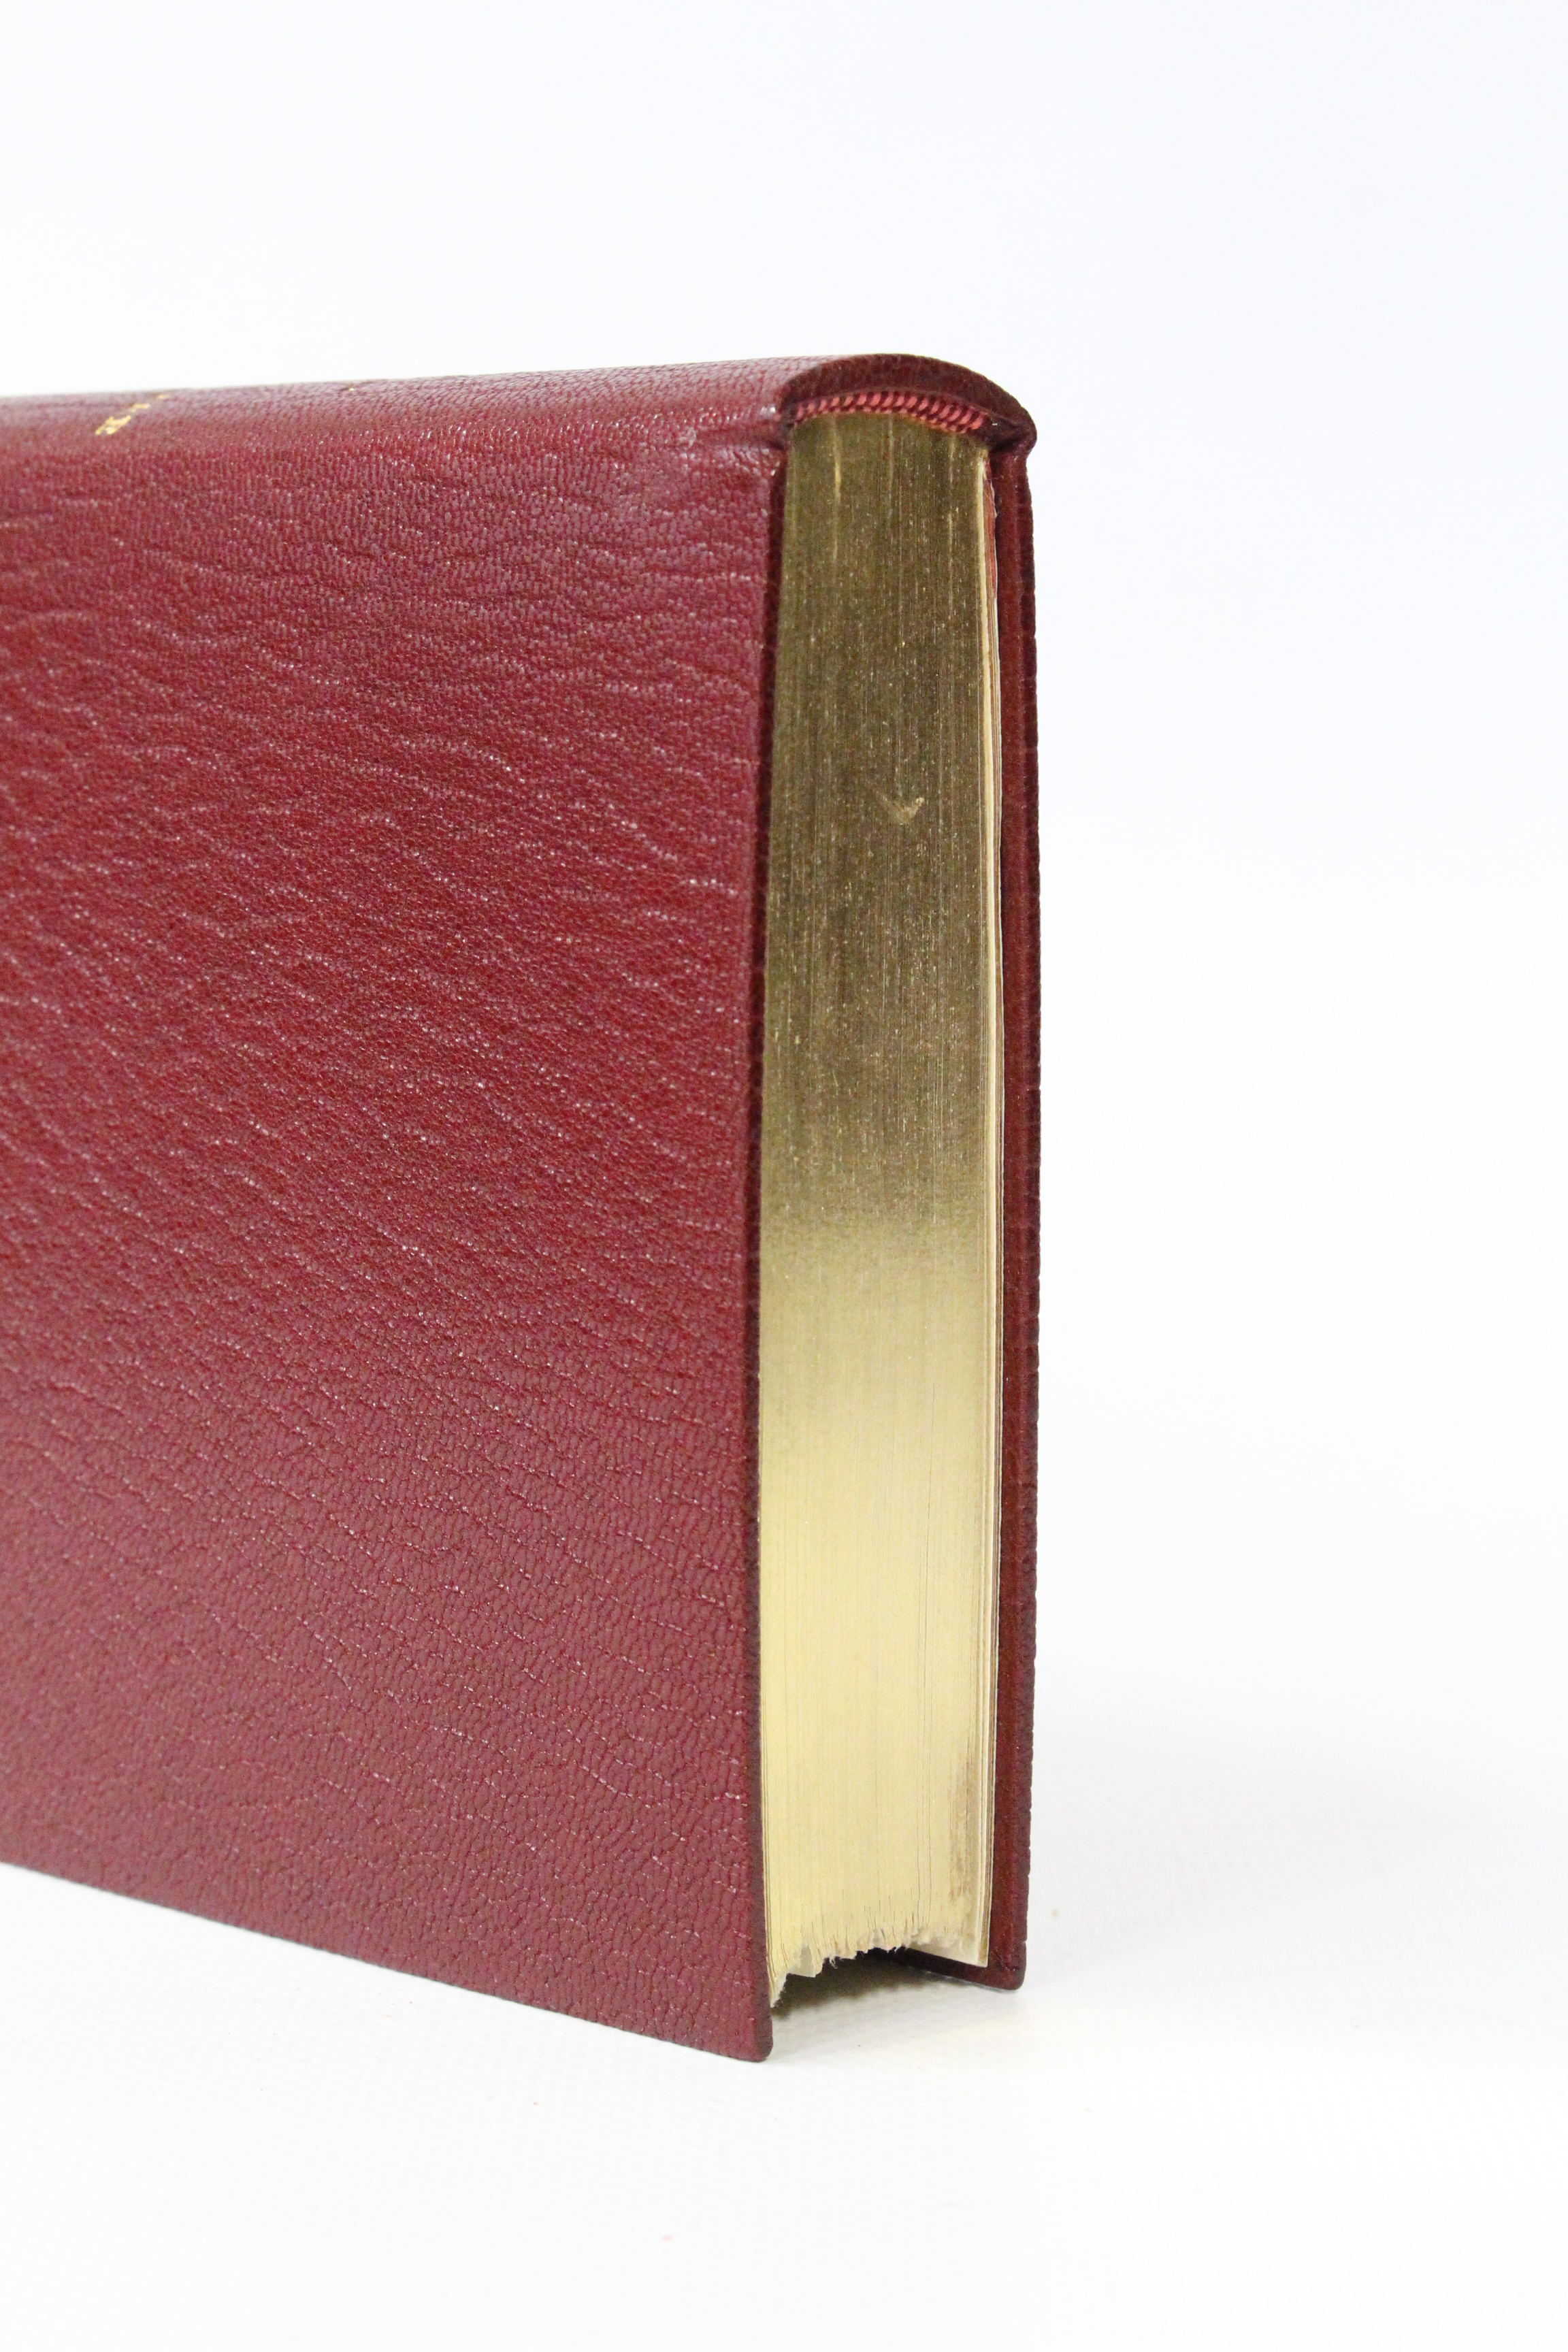 Details About Cendrars La Main Coupee Fine Binding First Edition Numbered 1946 - 